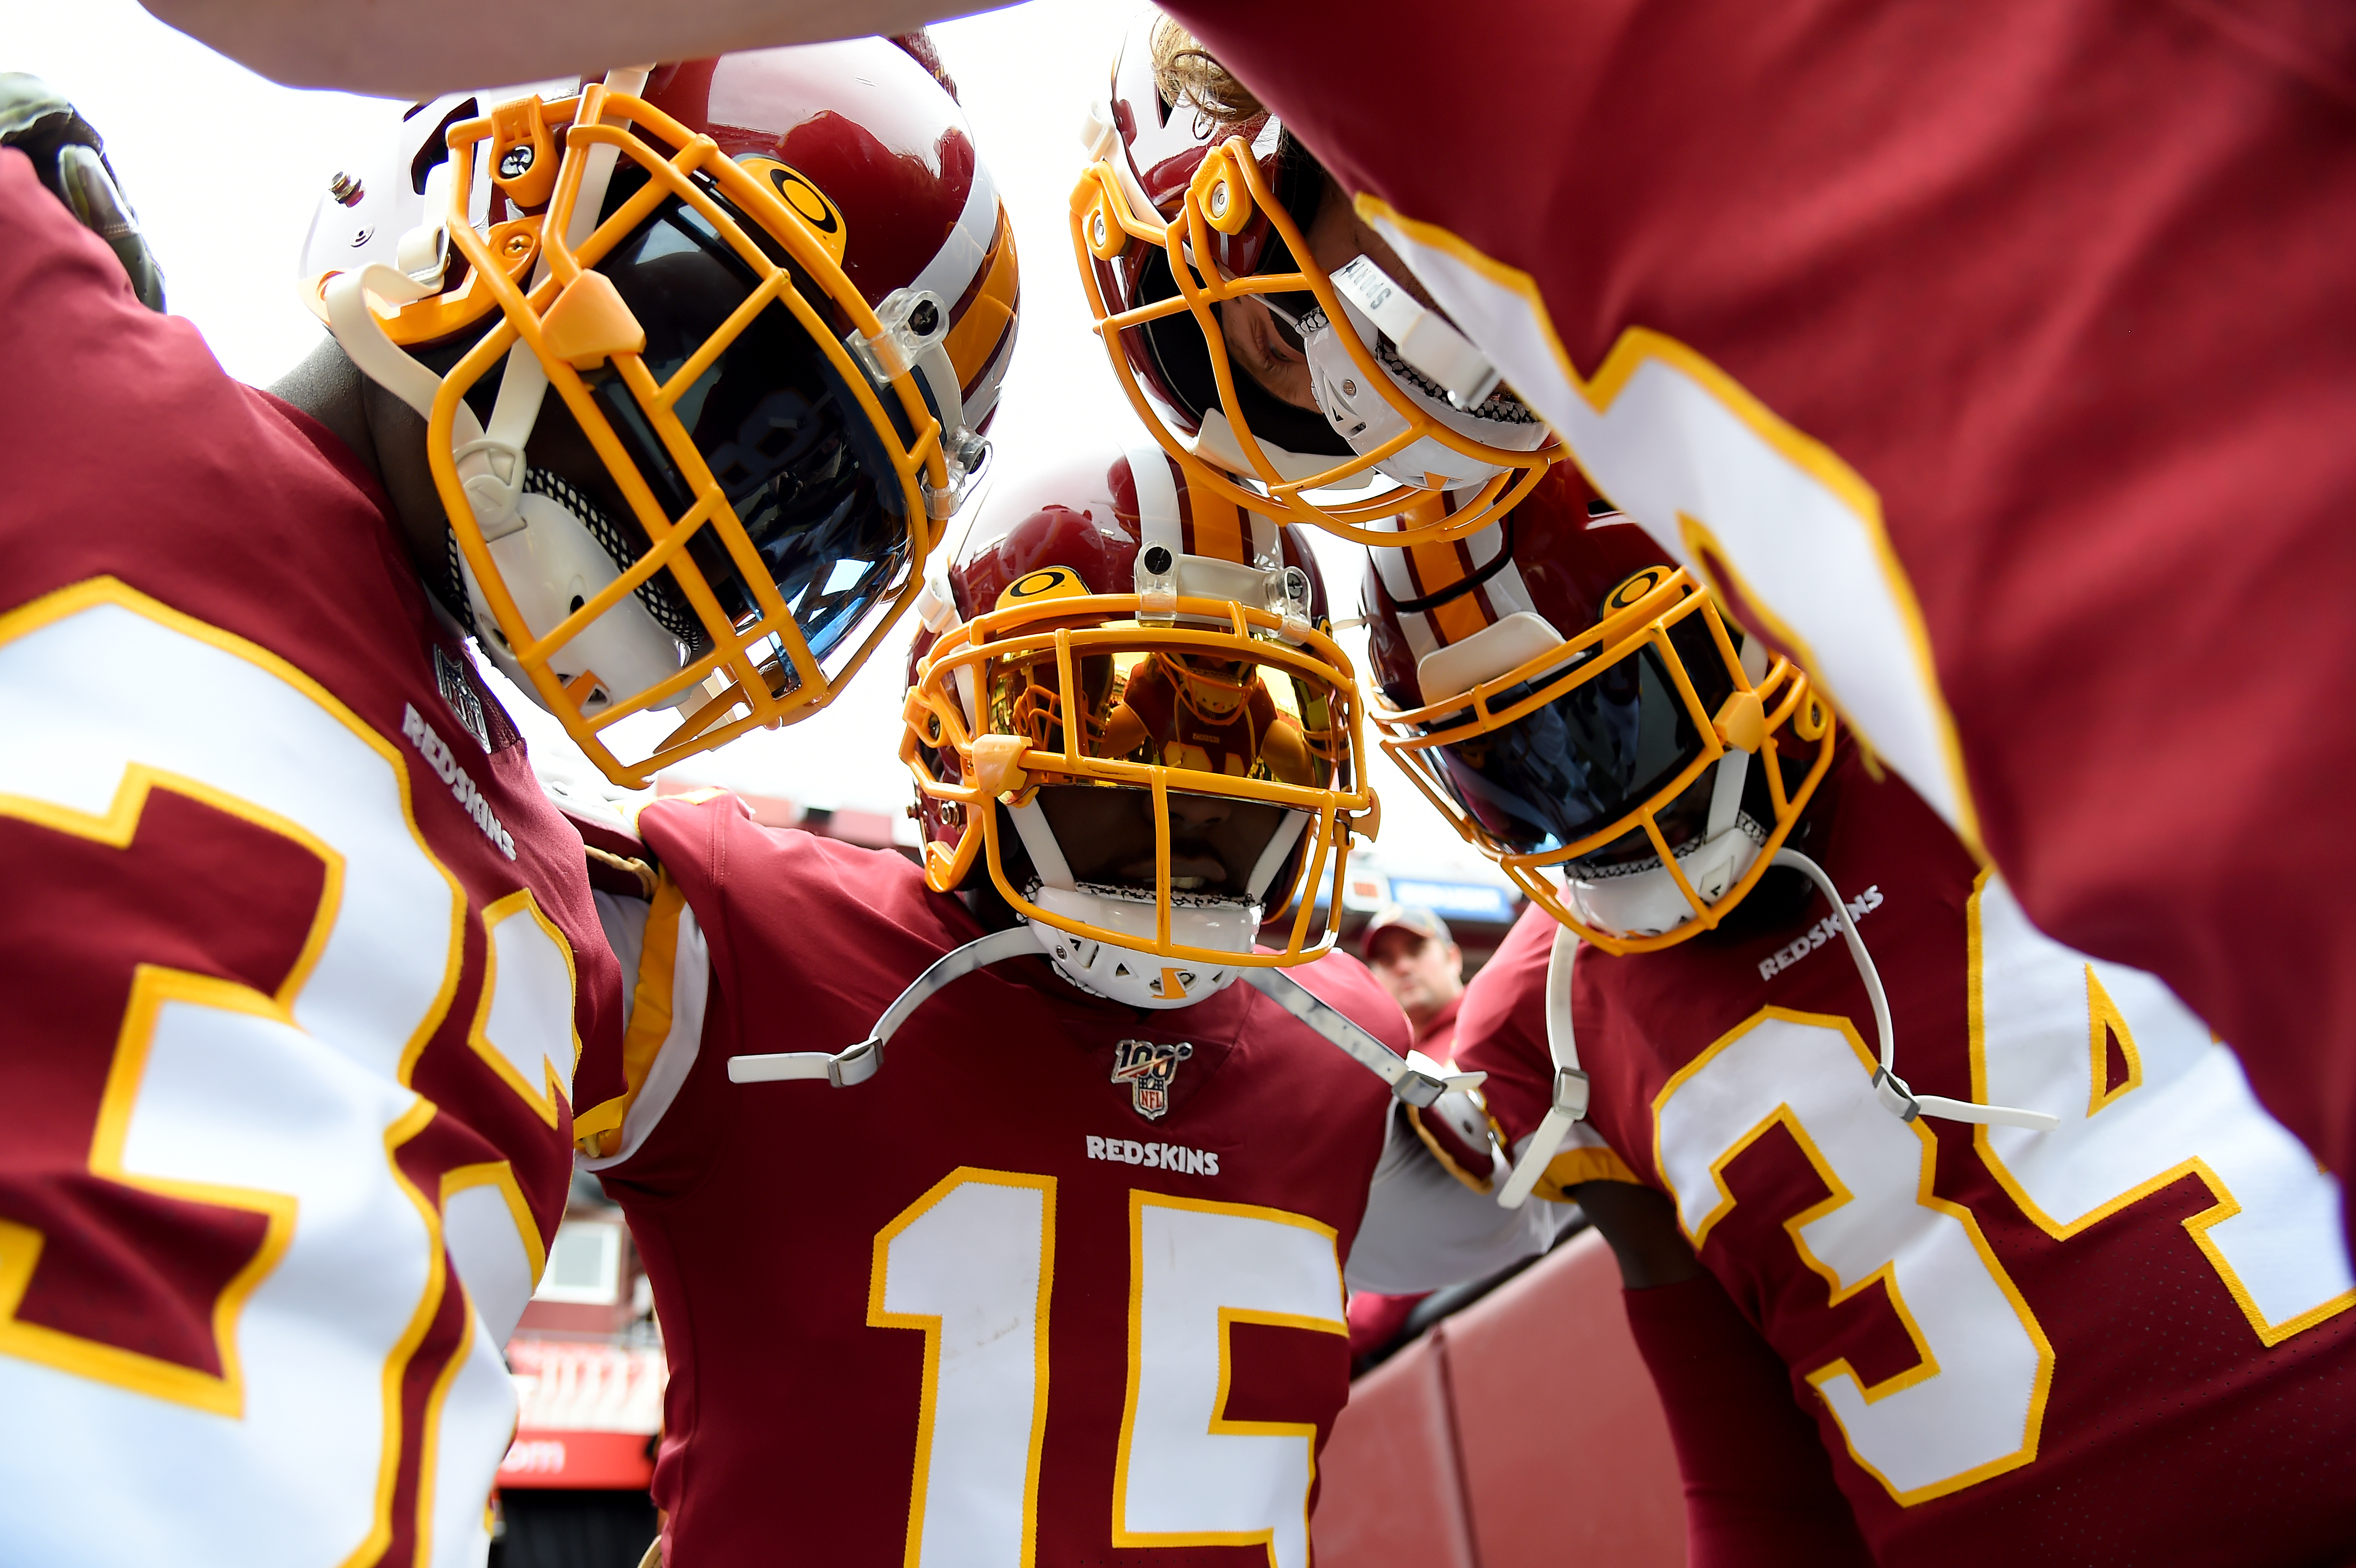 Washington Redskins players complain about loyalty of home fans